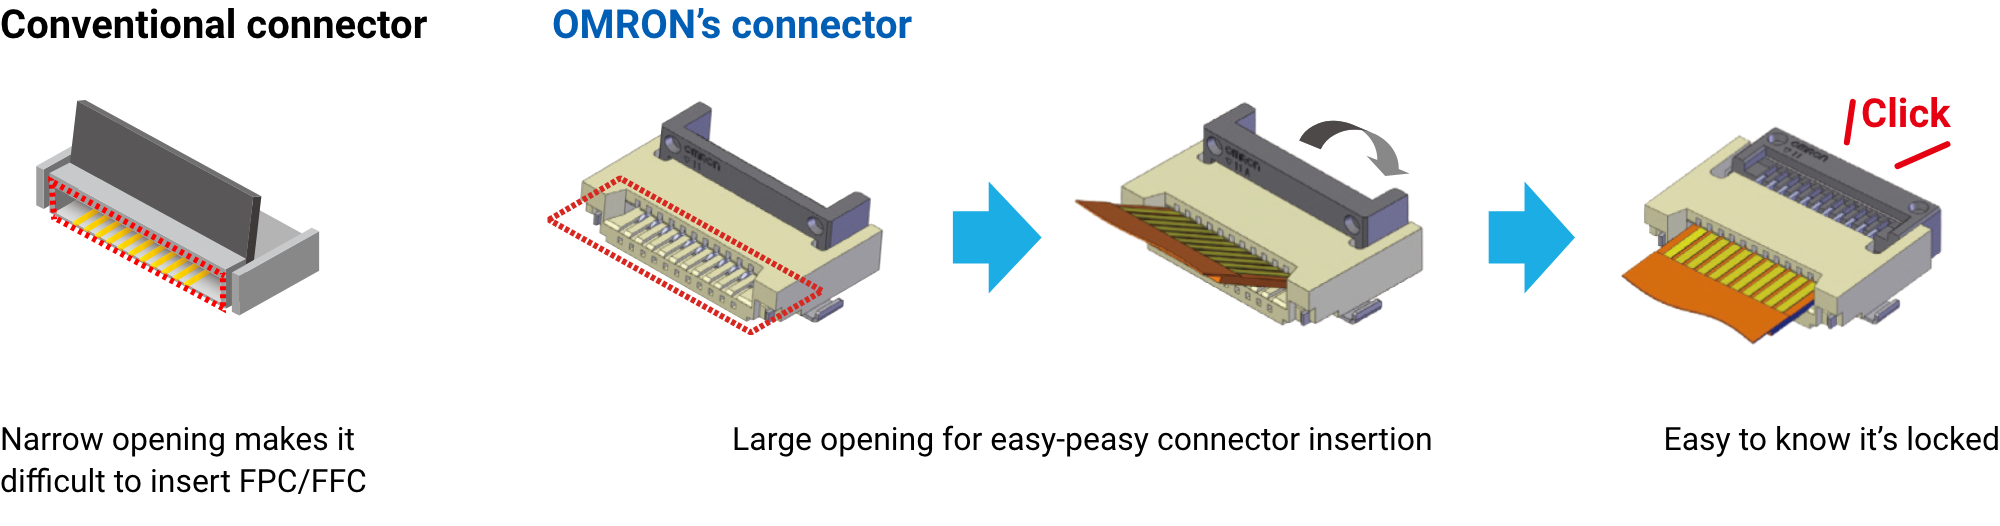 ［Conventional connector］Narrow opening makes it difficult to insert FPC/FFC.［OMRON's connector］Large opening for easy-peasy connector insertion. Easy to know it's locked.